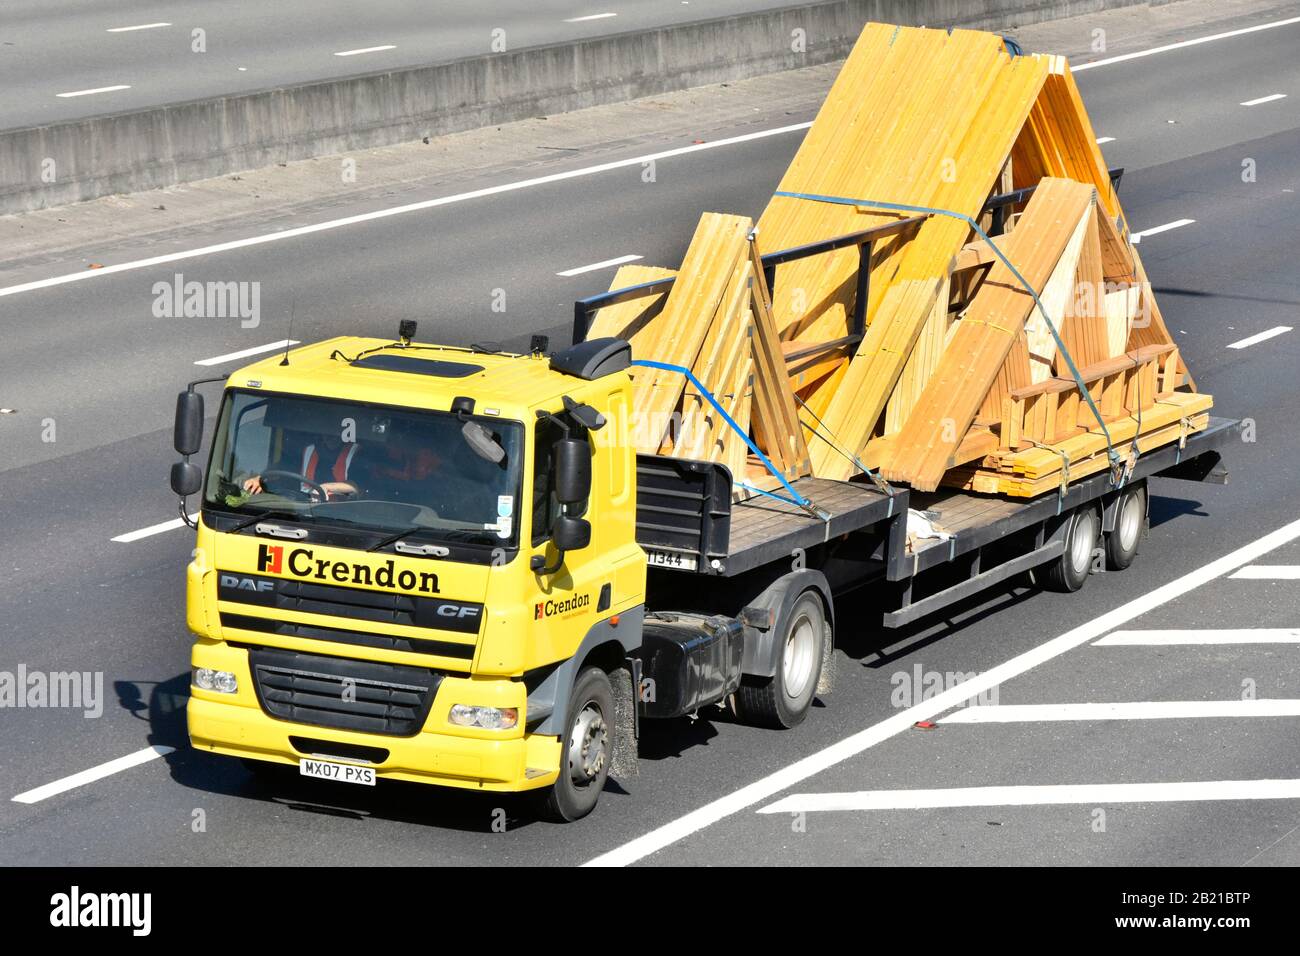 Prefabricated roof trusses by Crendon Timber Engineering business transported on company hgv lorry truck cab driver & low loader trailer UK motorway Stock Photo